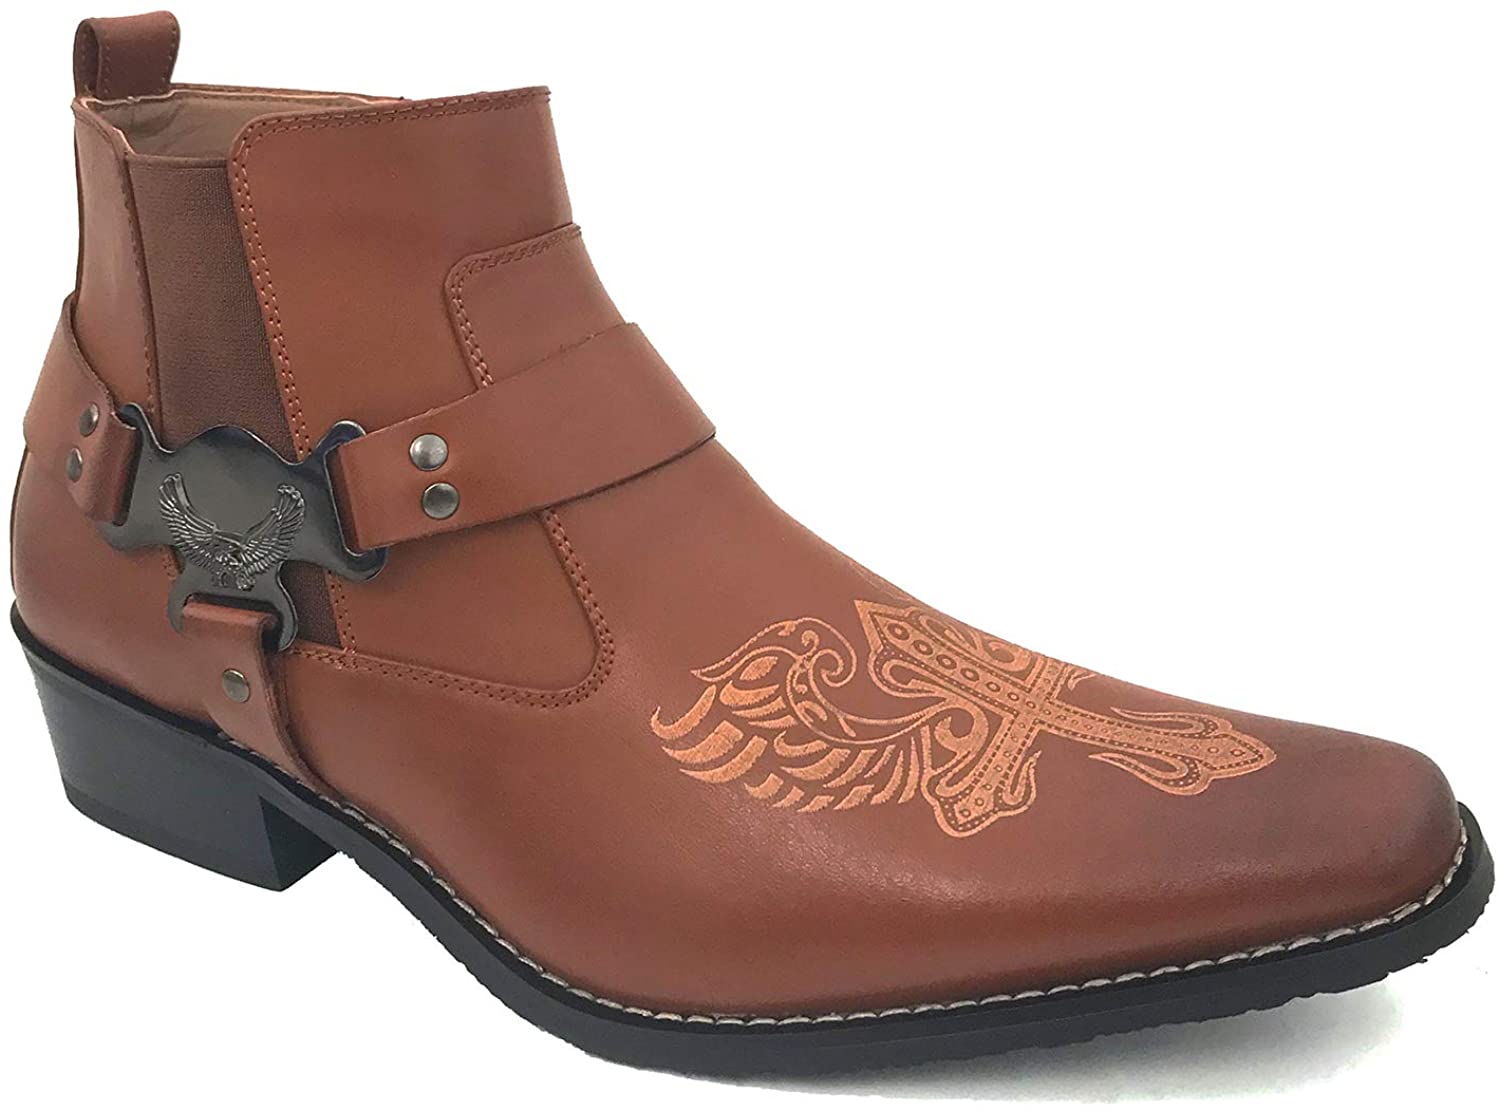 Men's Cowboy Boots Western Leather Lined Ankle Harness Strap Side Zipper Shoes - image 1 of 5